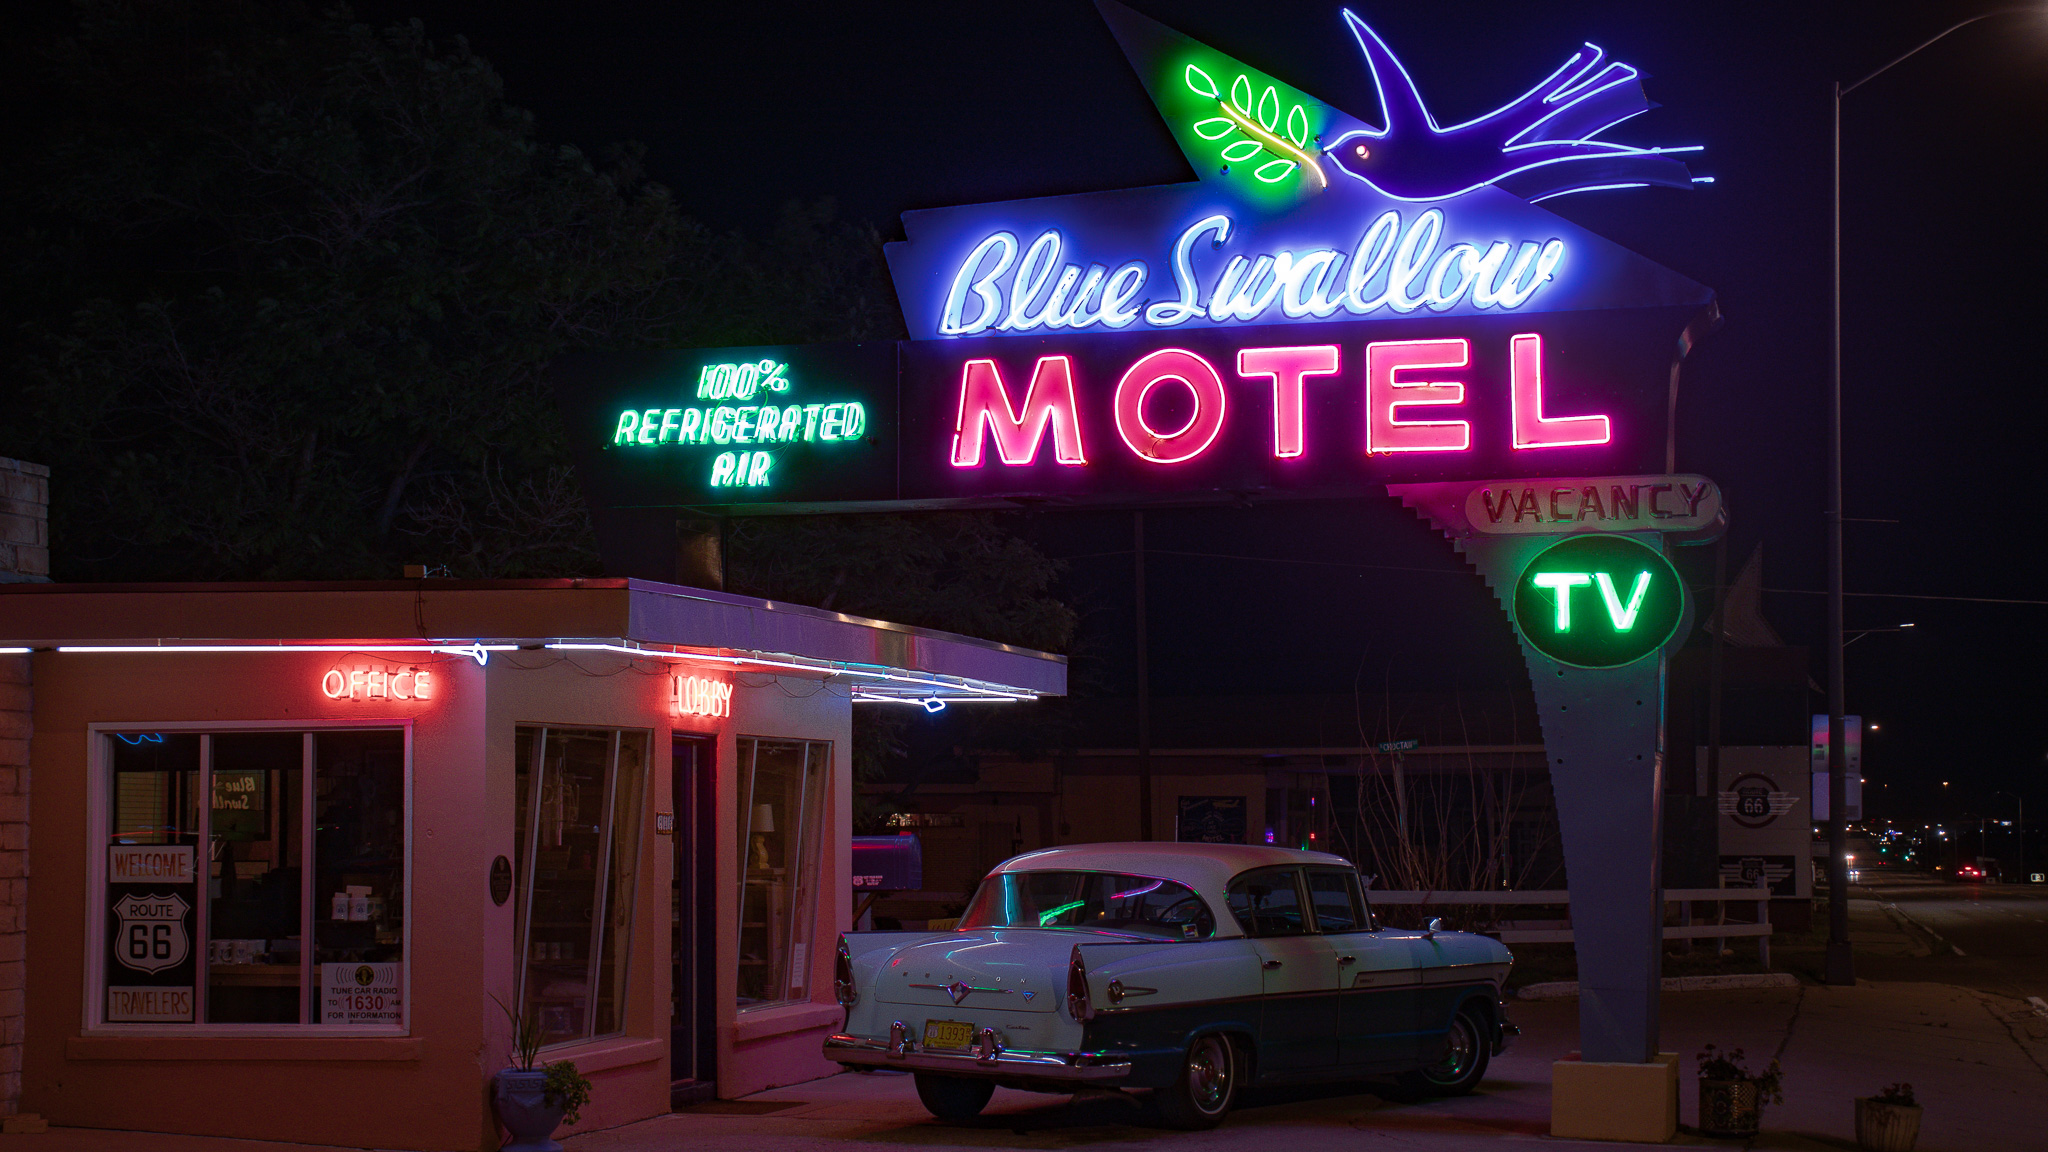 A beacon and superstar of the historic Route, Blue Swallow Motel is one of the oldest preserved icons still remaining in service today. This is through no doubt years of work, continuing today, to maintain this snapshot of what life once was: becoming art from what was once mundane and normal.